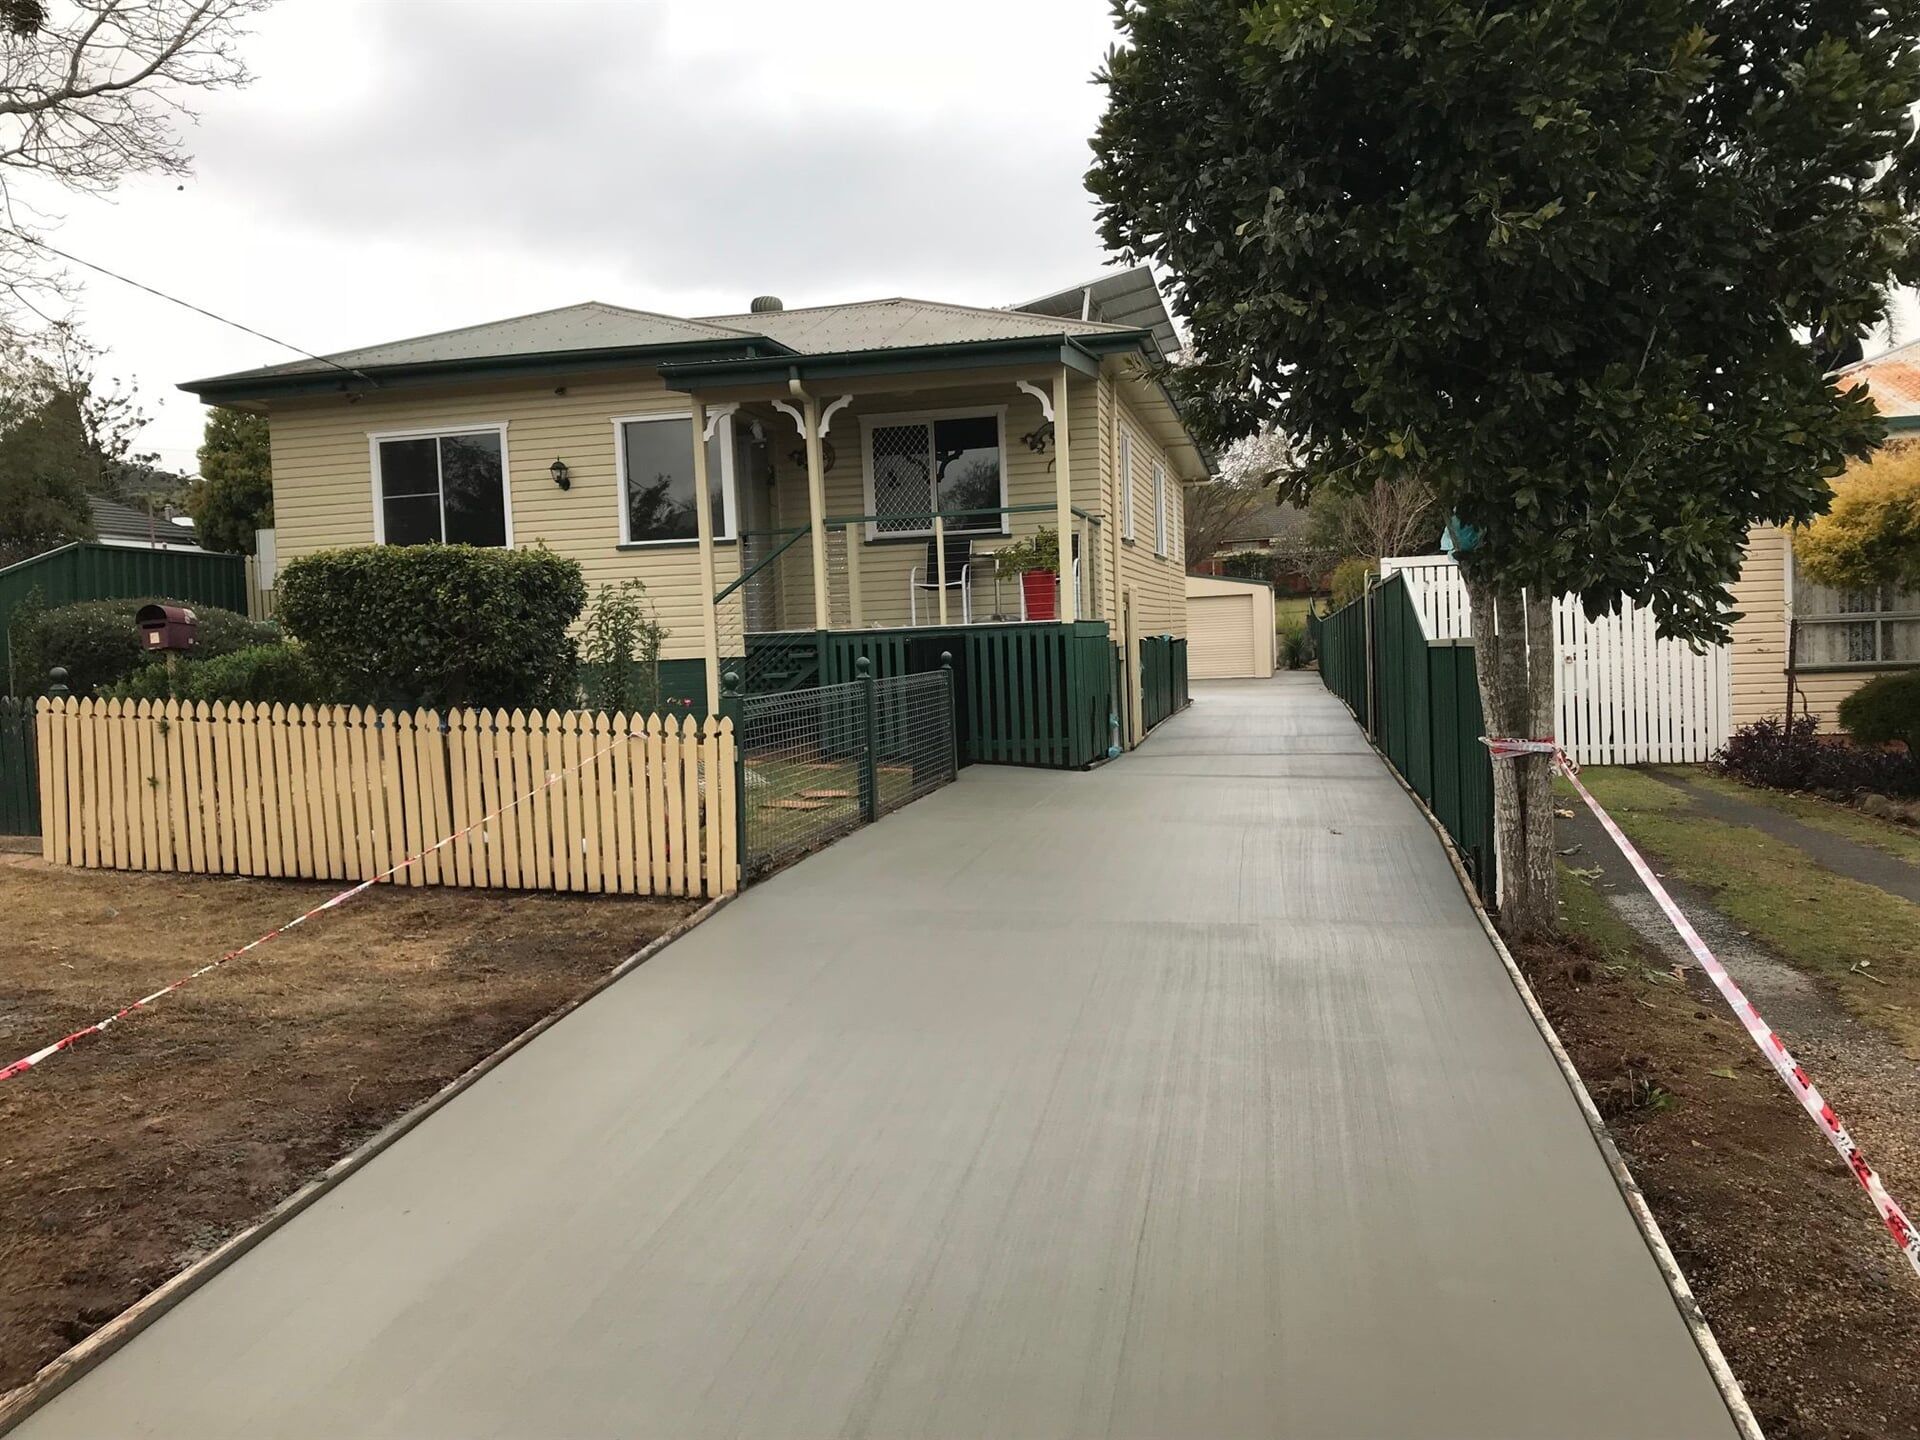 A freshly poured concrete driveway in rural South East Queensland